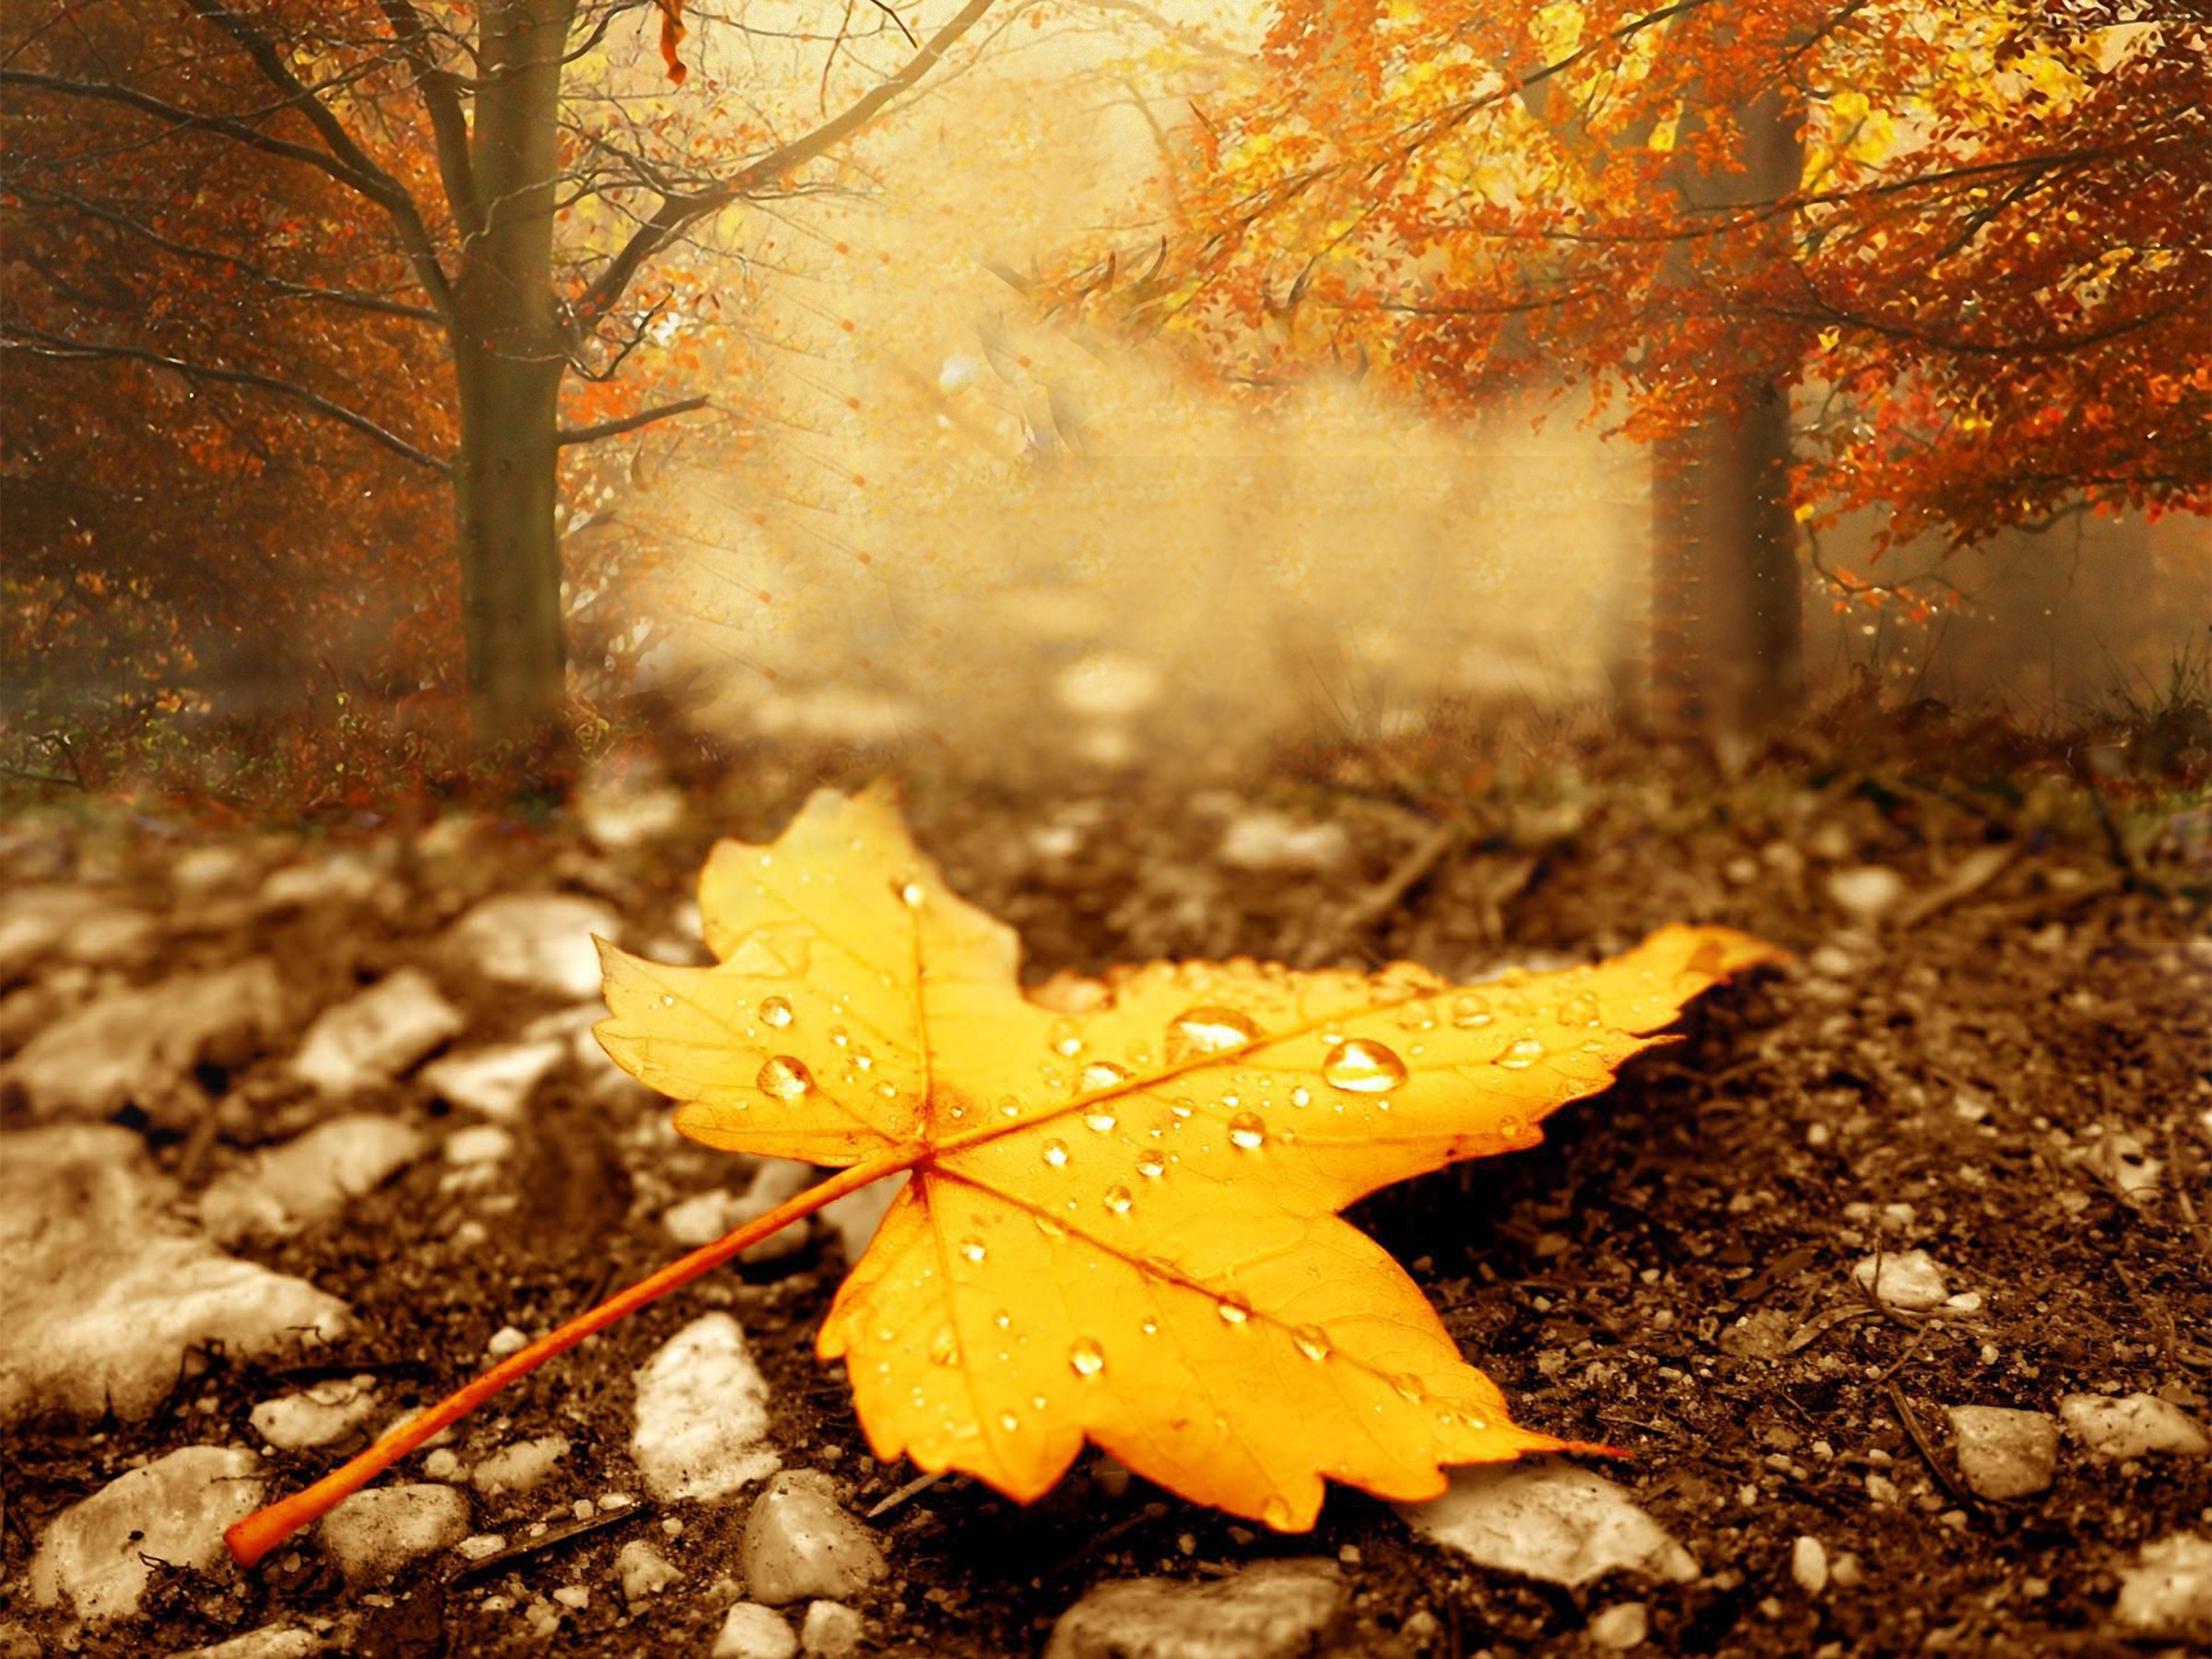 2400x1800 Fall Season Wallpapers High Definition with Wallpaper High Resolution   px 5.95 MB